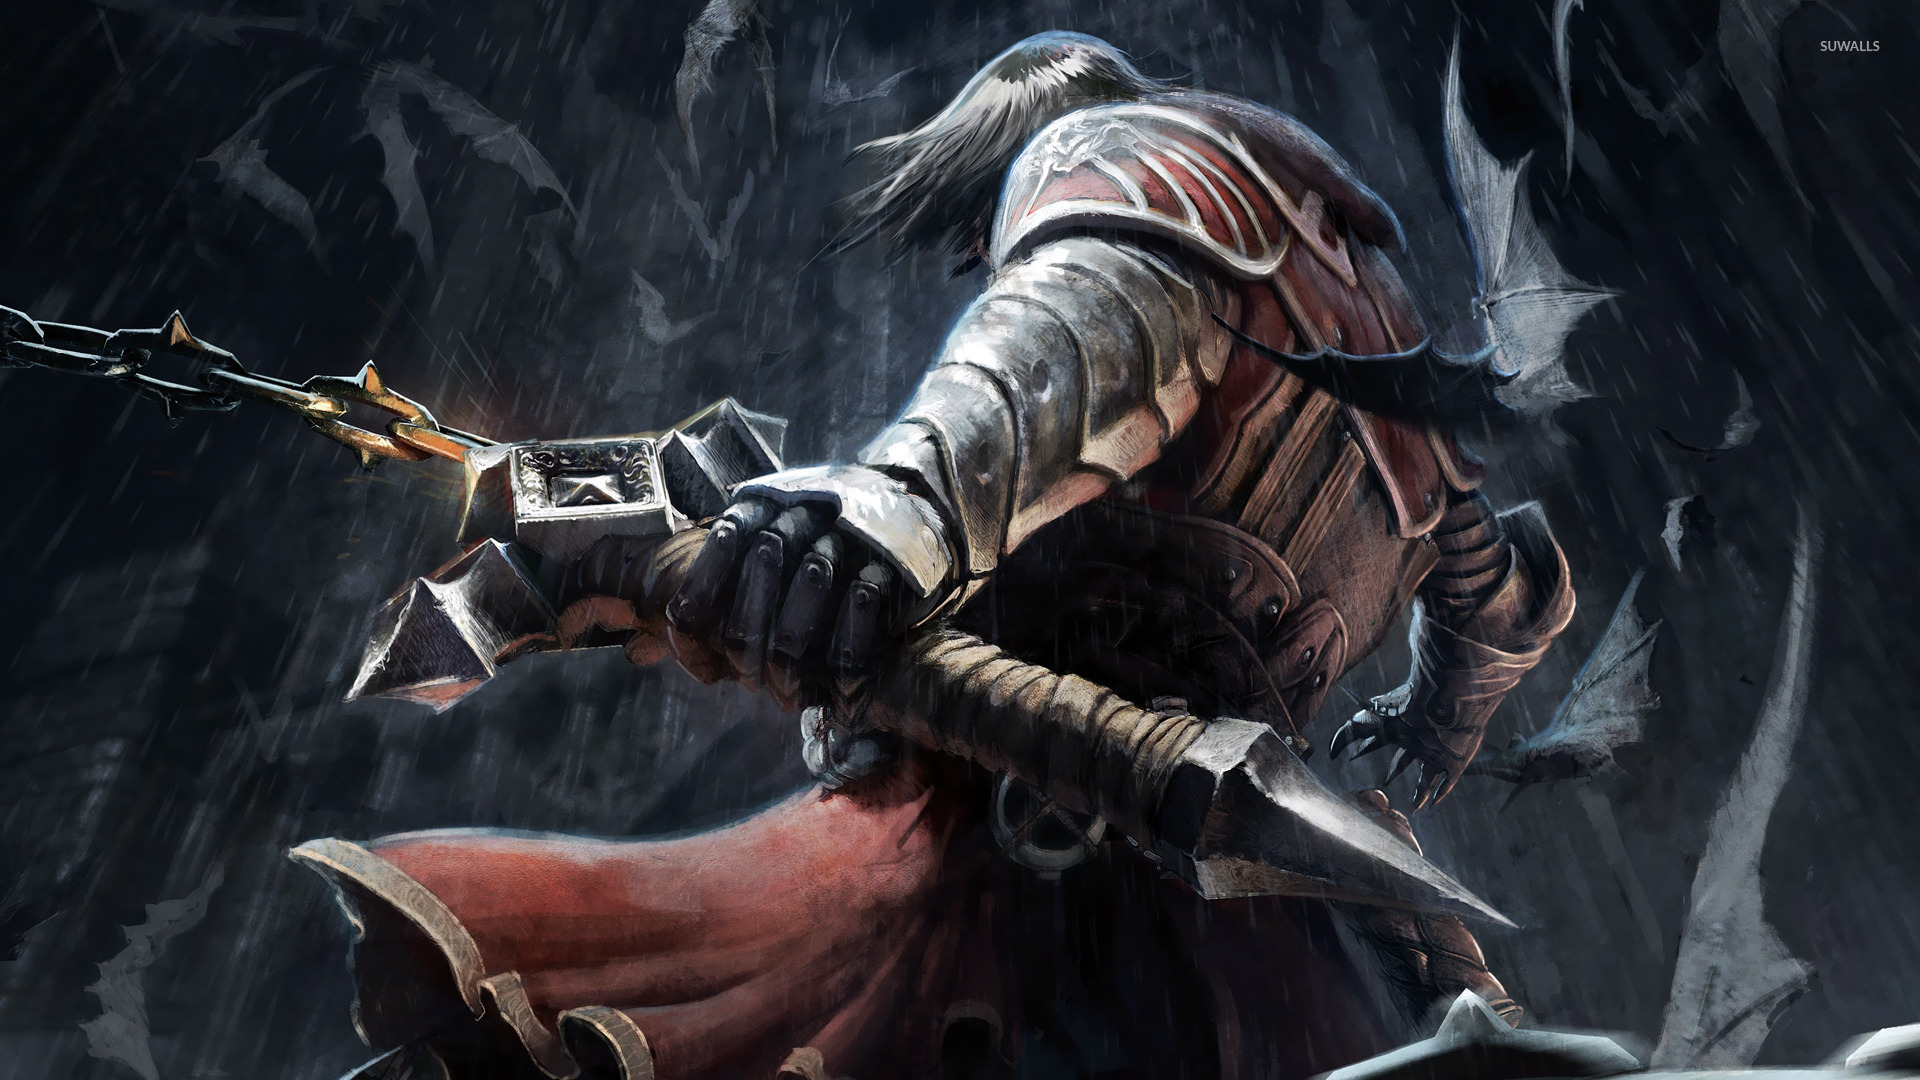 castlevania lords of shadow wallpaper 1920x1080